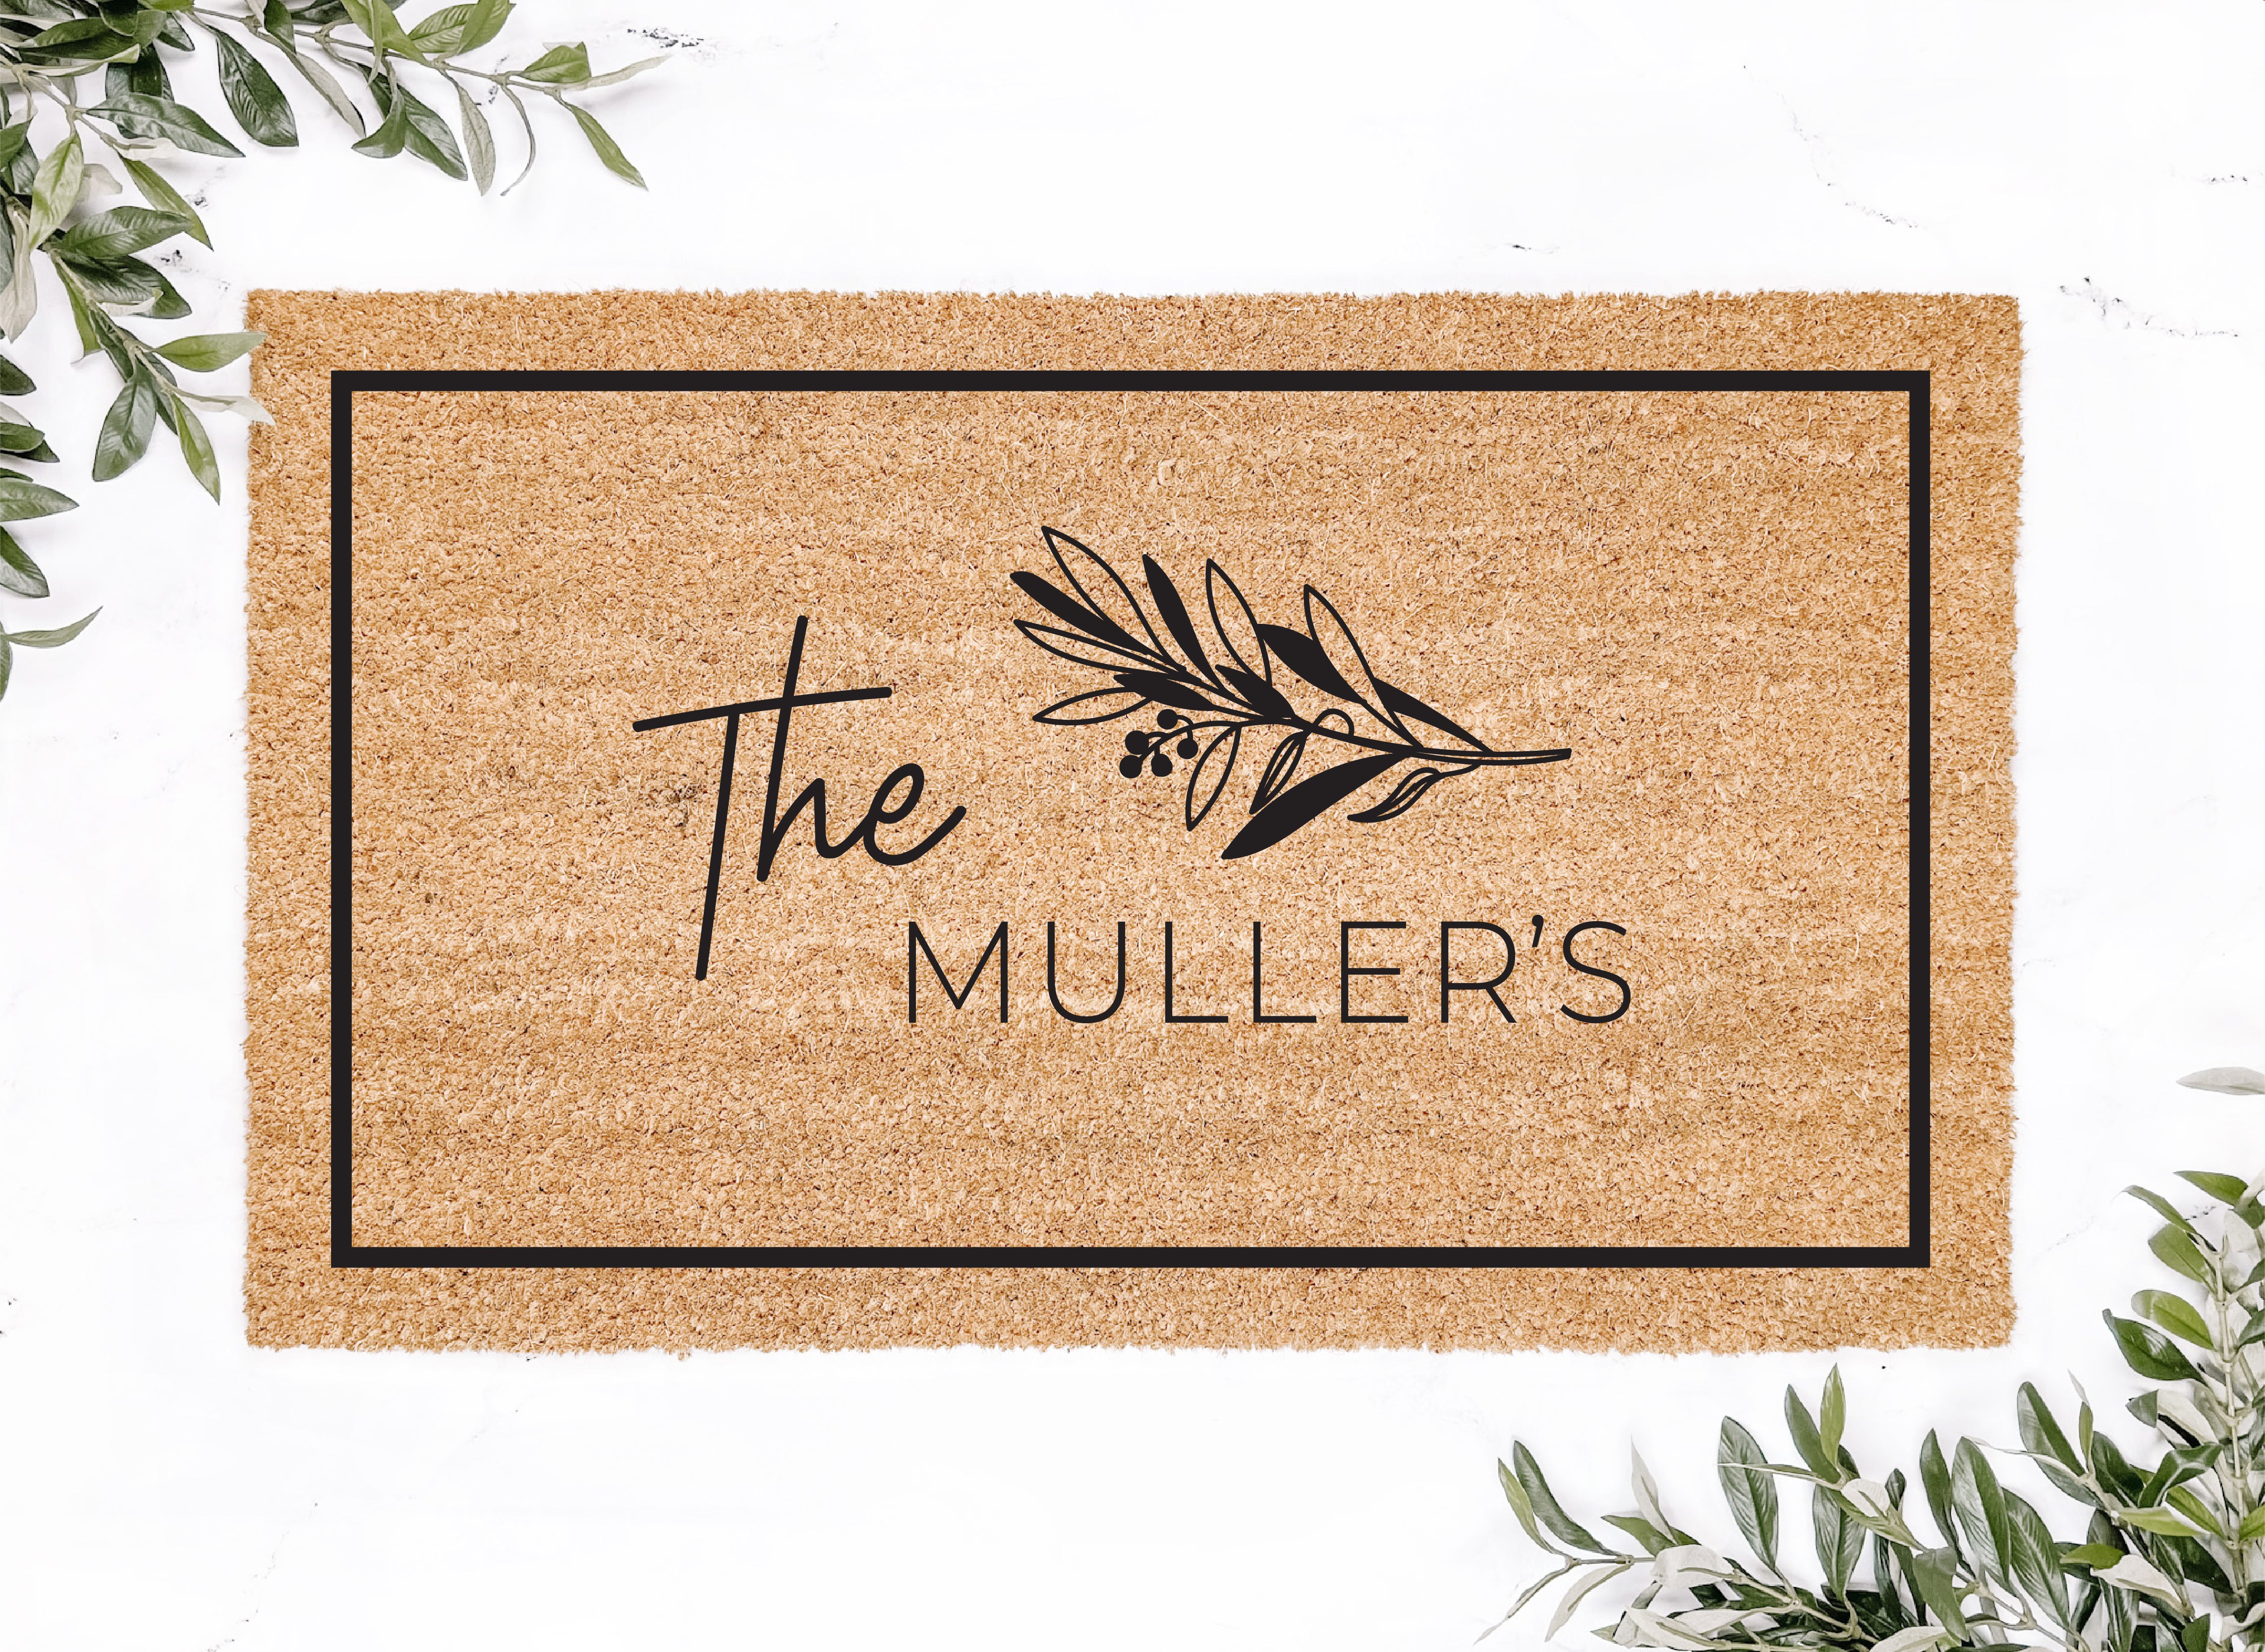 Personalized Framed Olive Branch Doormat